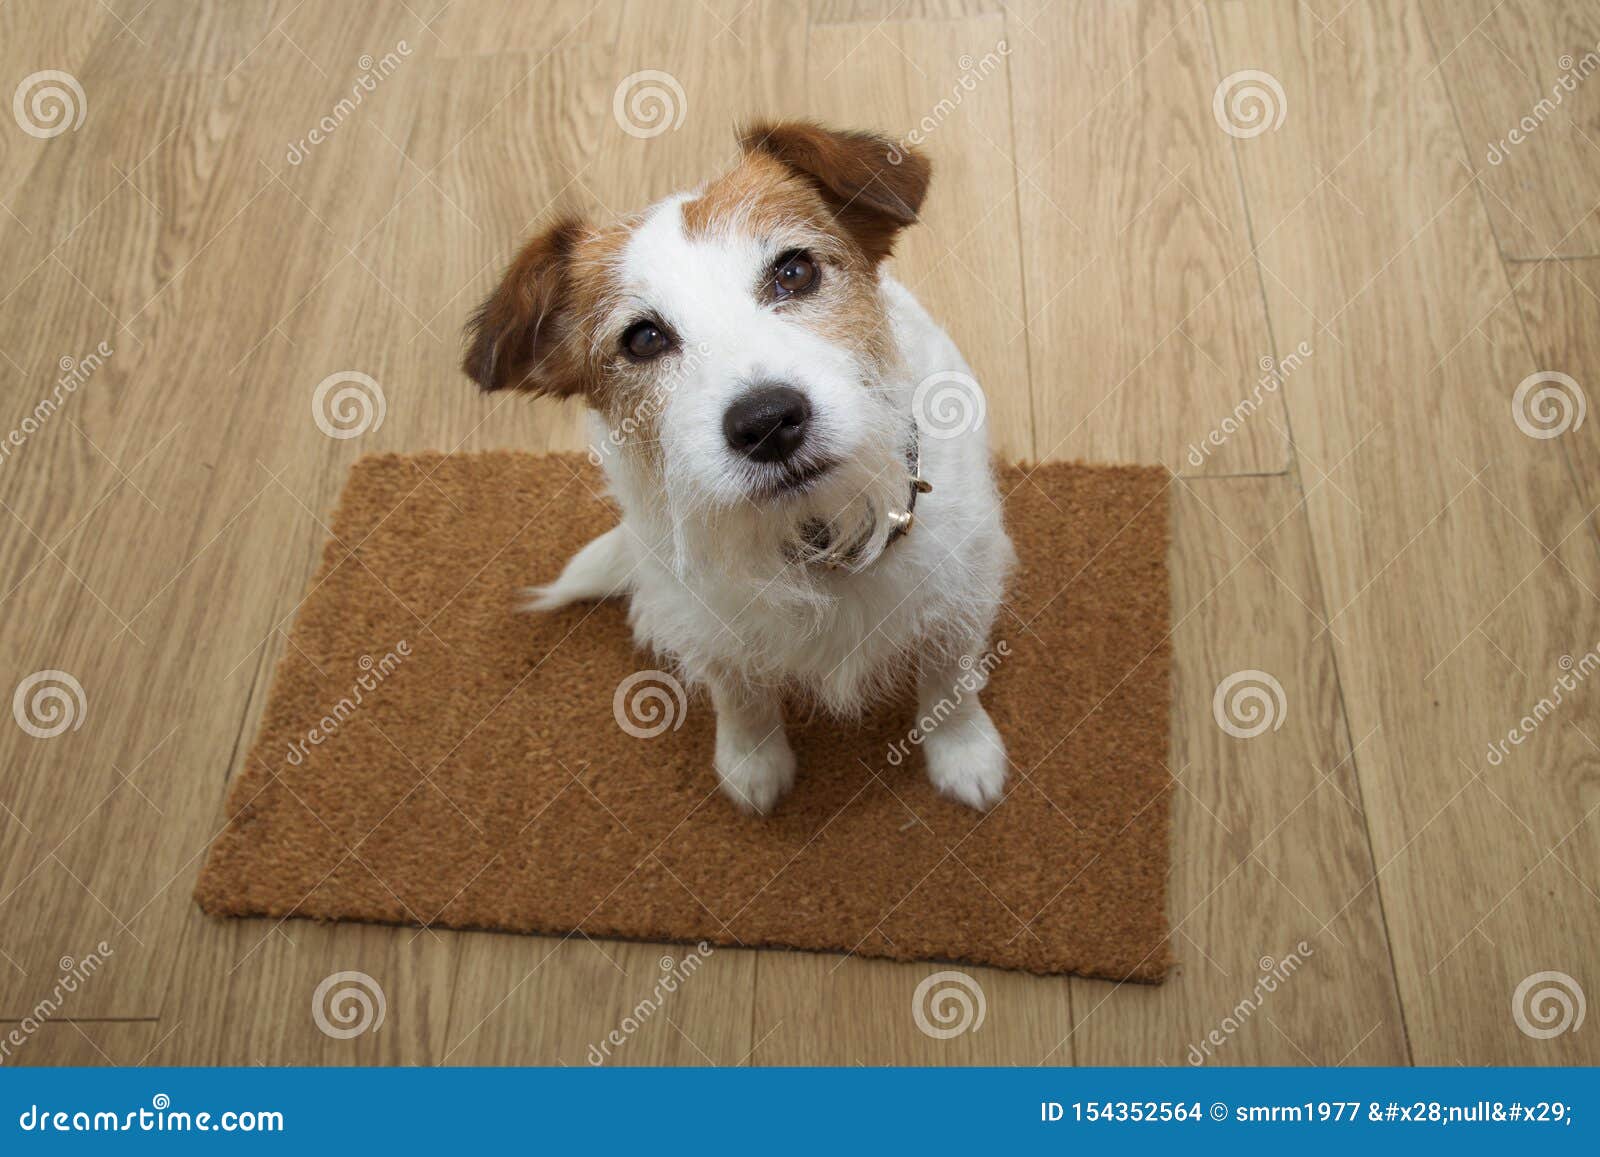 Jack Russell Dog Sitting Over A Doormat Asking For A Treat